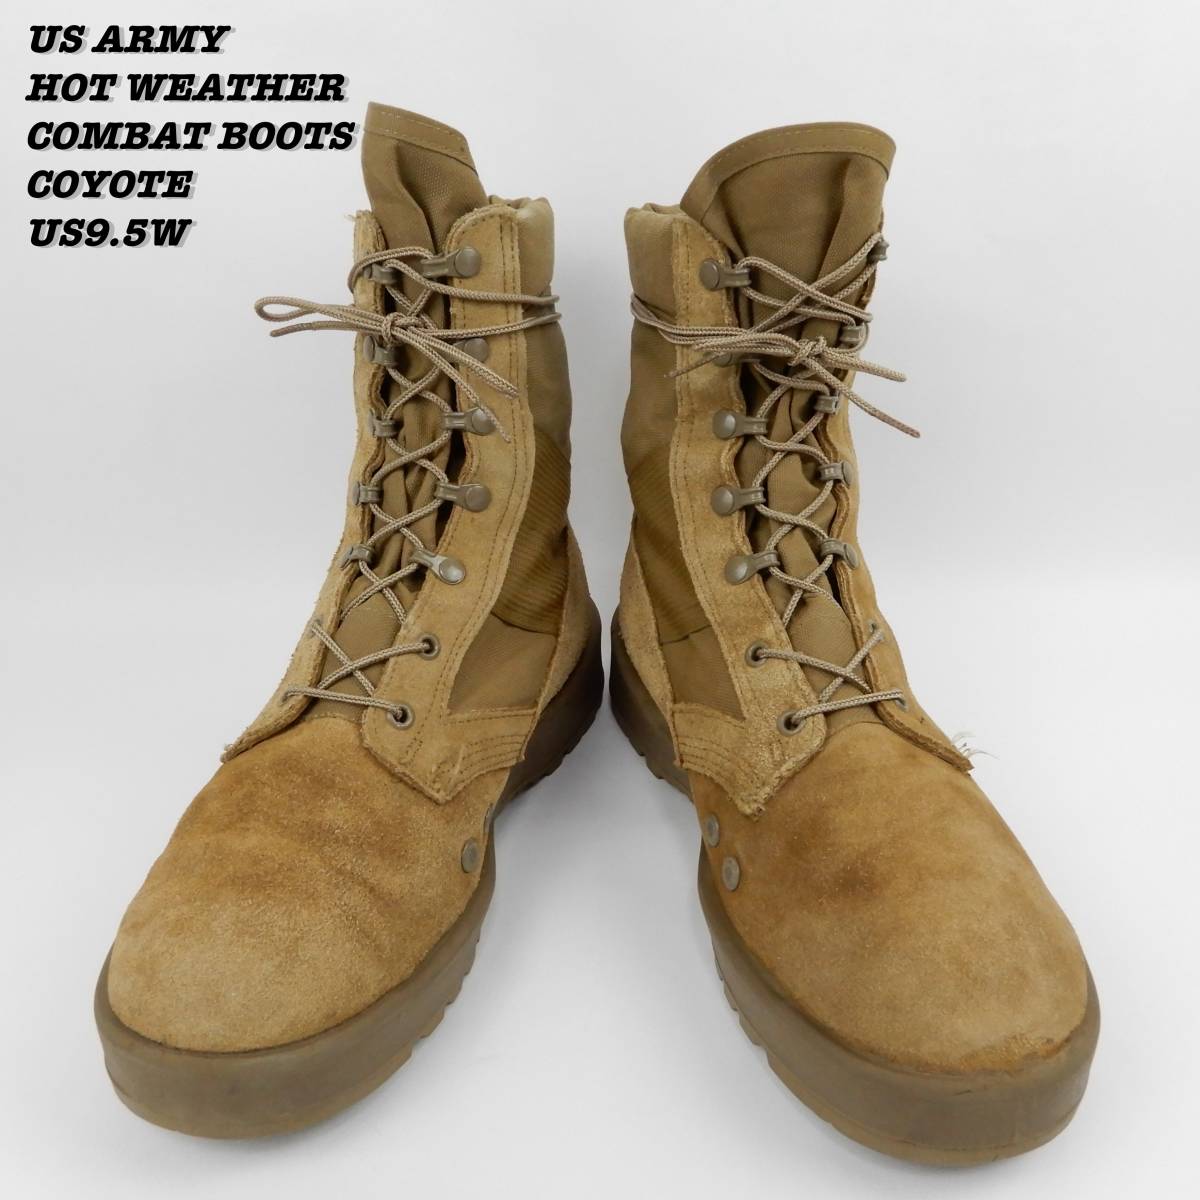 US ARMY HOT WEATHER ARMY COMBAT BOOTS COYOTE 9.5W アメリカ軍 米軍 ...